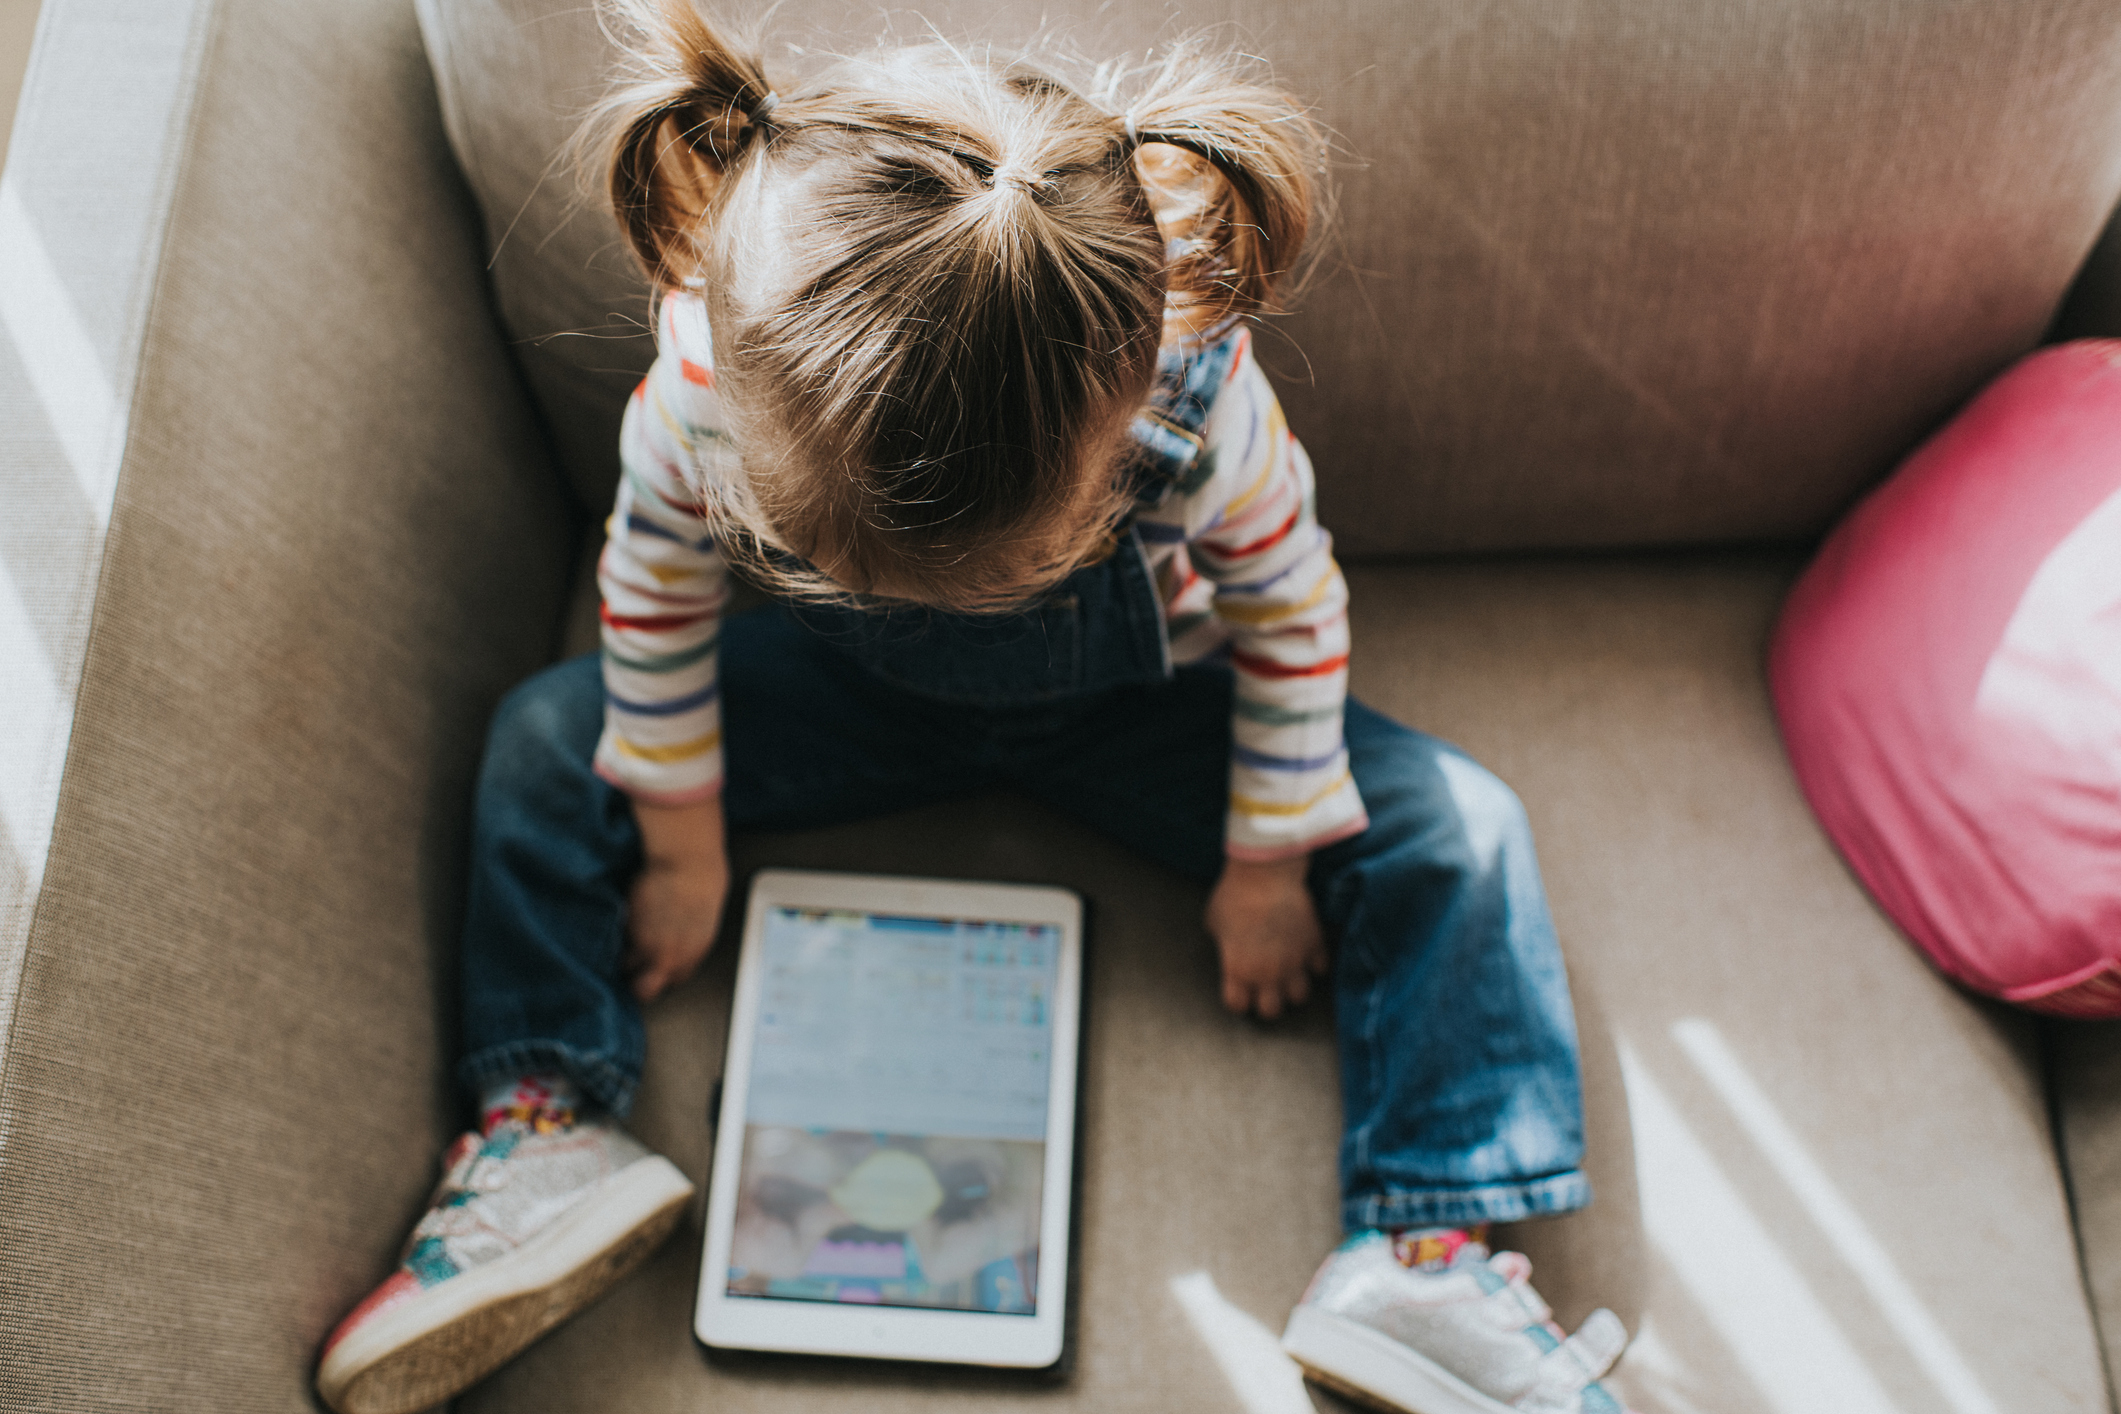 Child seated on sofa, looking at a tablet screen, indicative of technology&#x27;s role in modern parenting